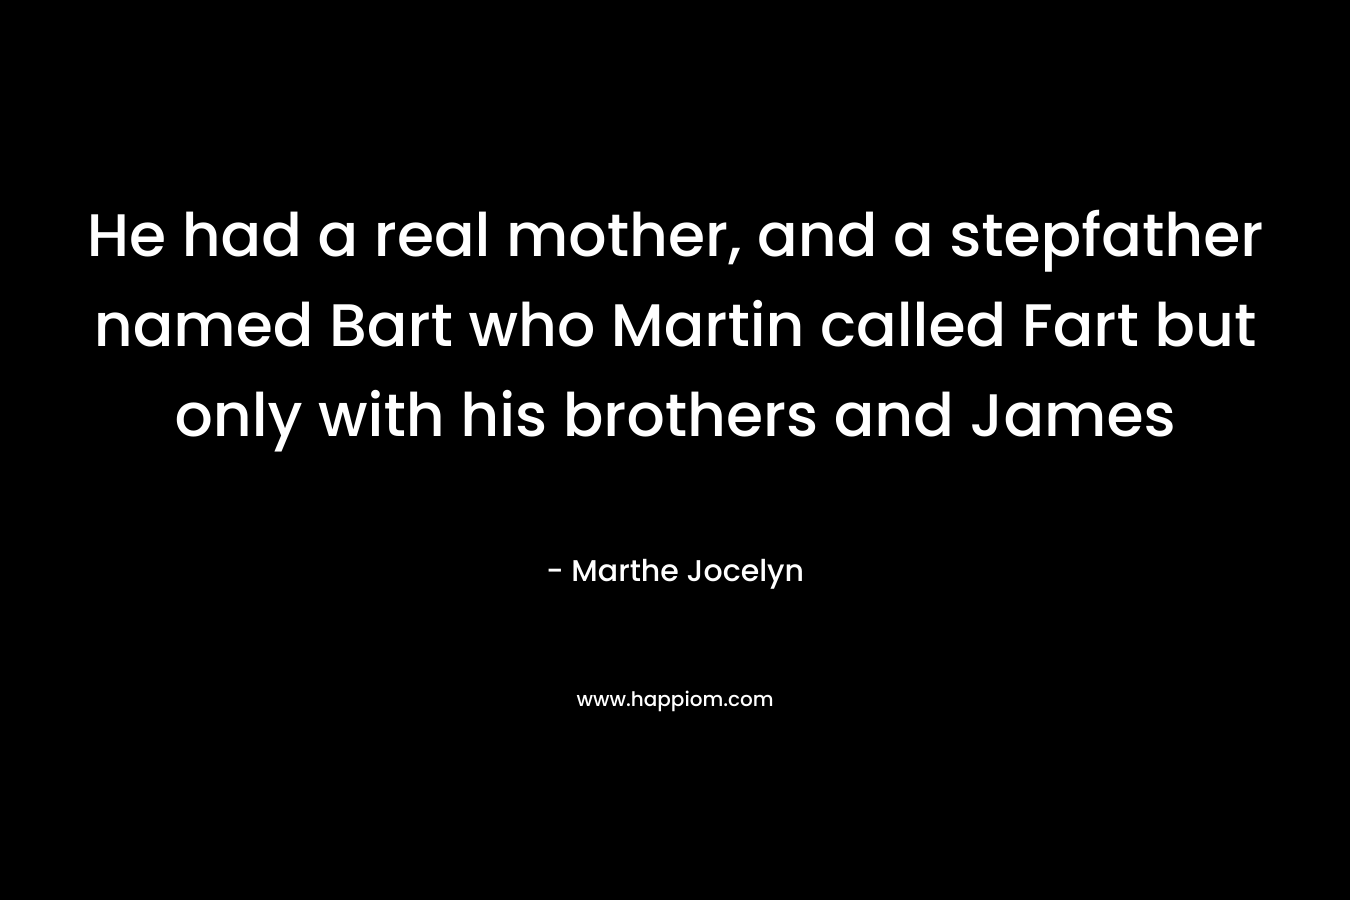 He had a real mother, and a stepfather named Bart who Martin called Fart but only with his brothers and James